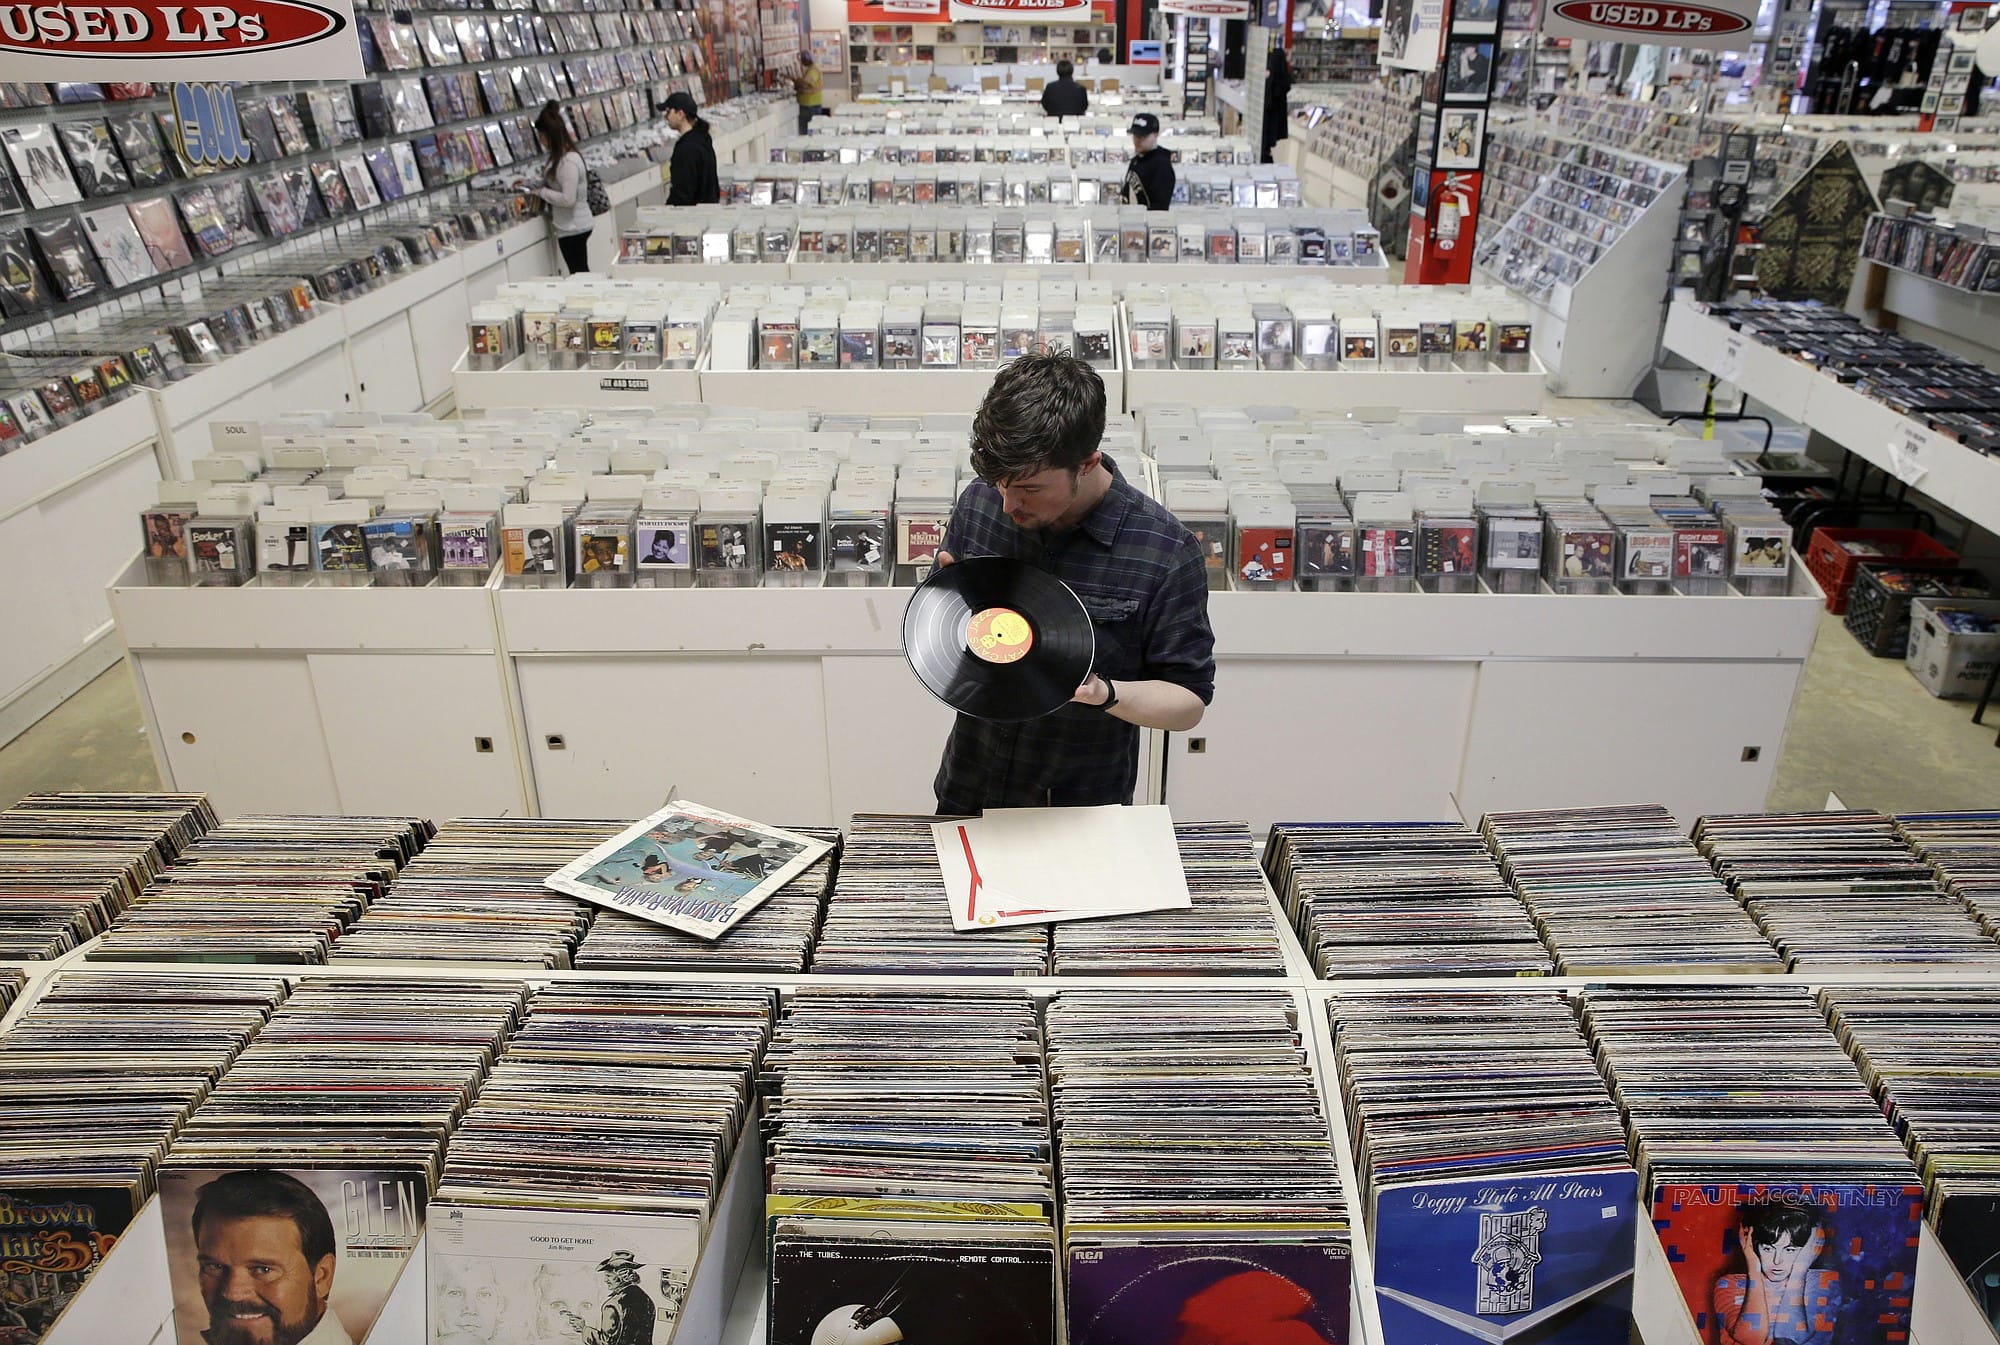 Record clerk Josh Kelly checks the condition of used albums Tuesday as he puts them in sales bins at Vintage Vinyl Records in Fords, N.J.